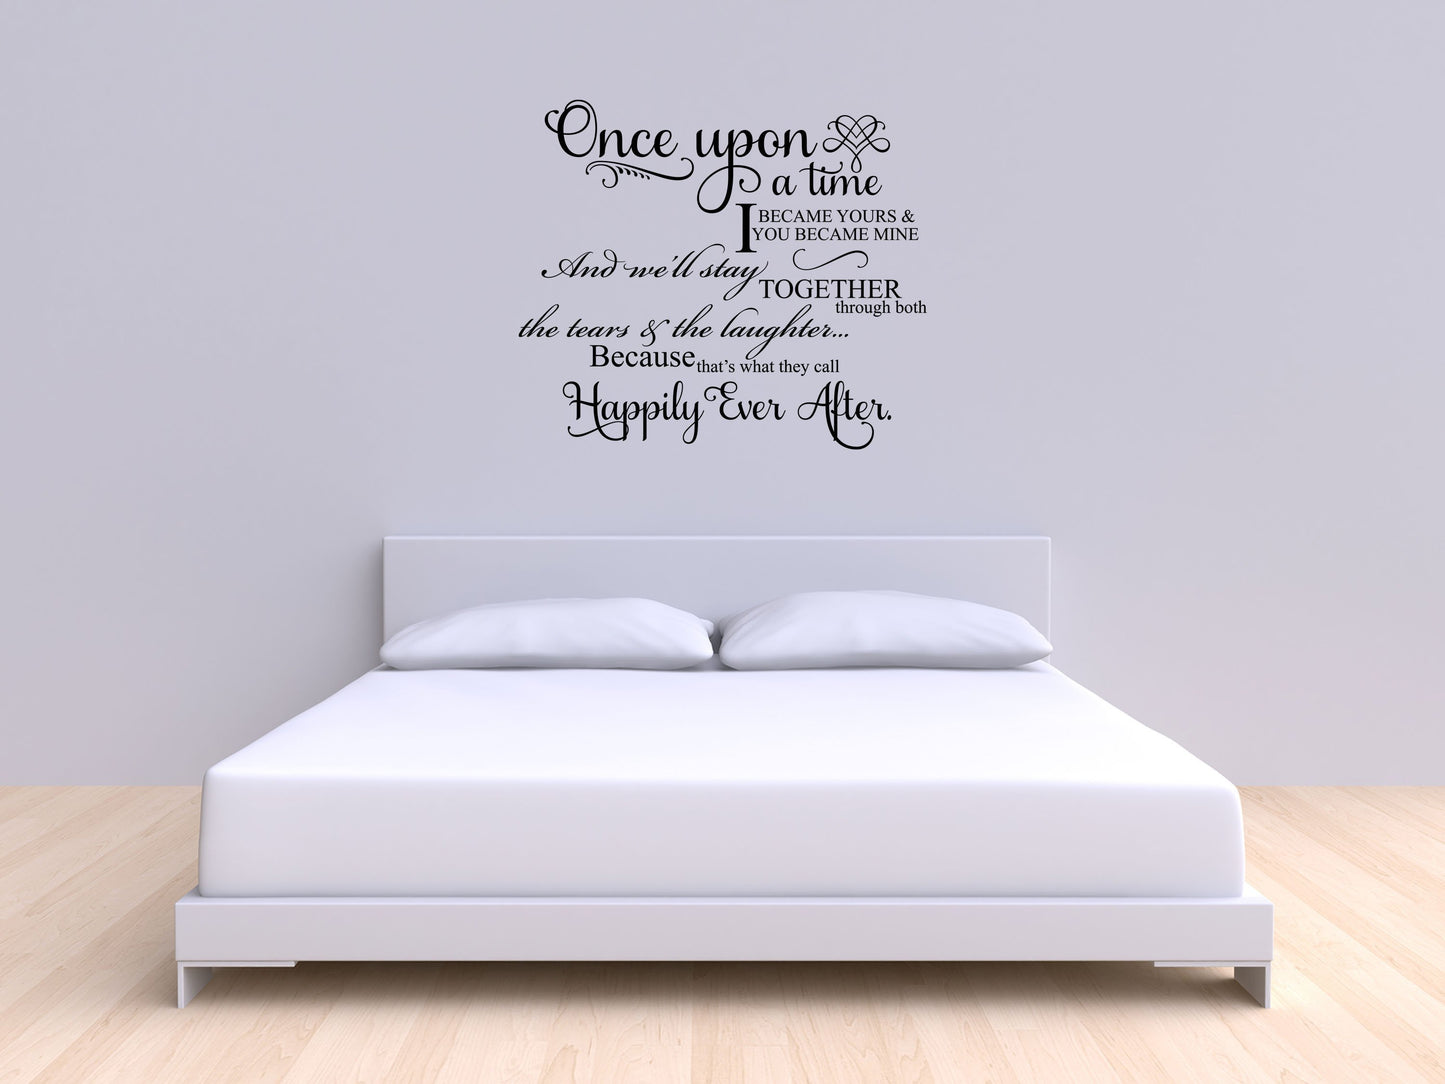 Once Upon A Time I Became Yours Vinyl Wall Sayings - Inspirational Wall Decals Vinyl Wall Decal Inspirational Wall Signs 